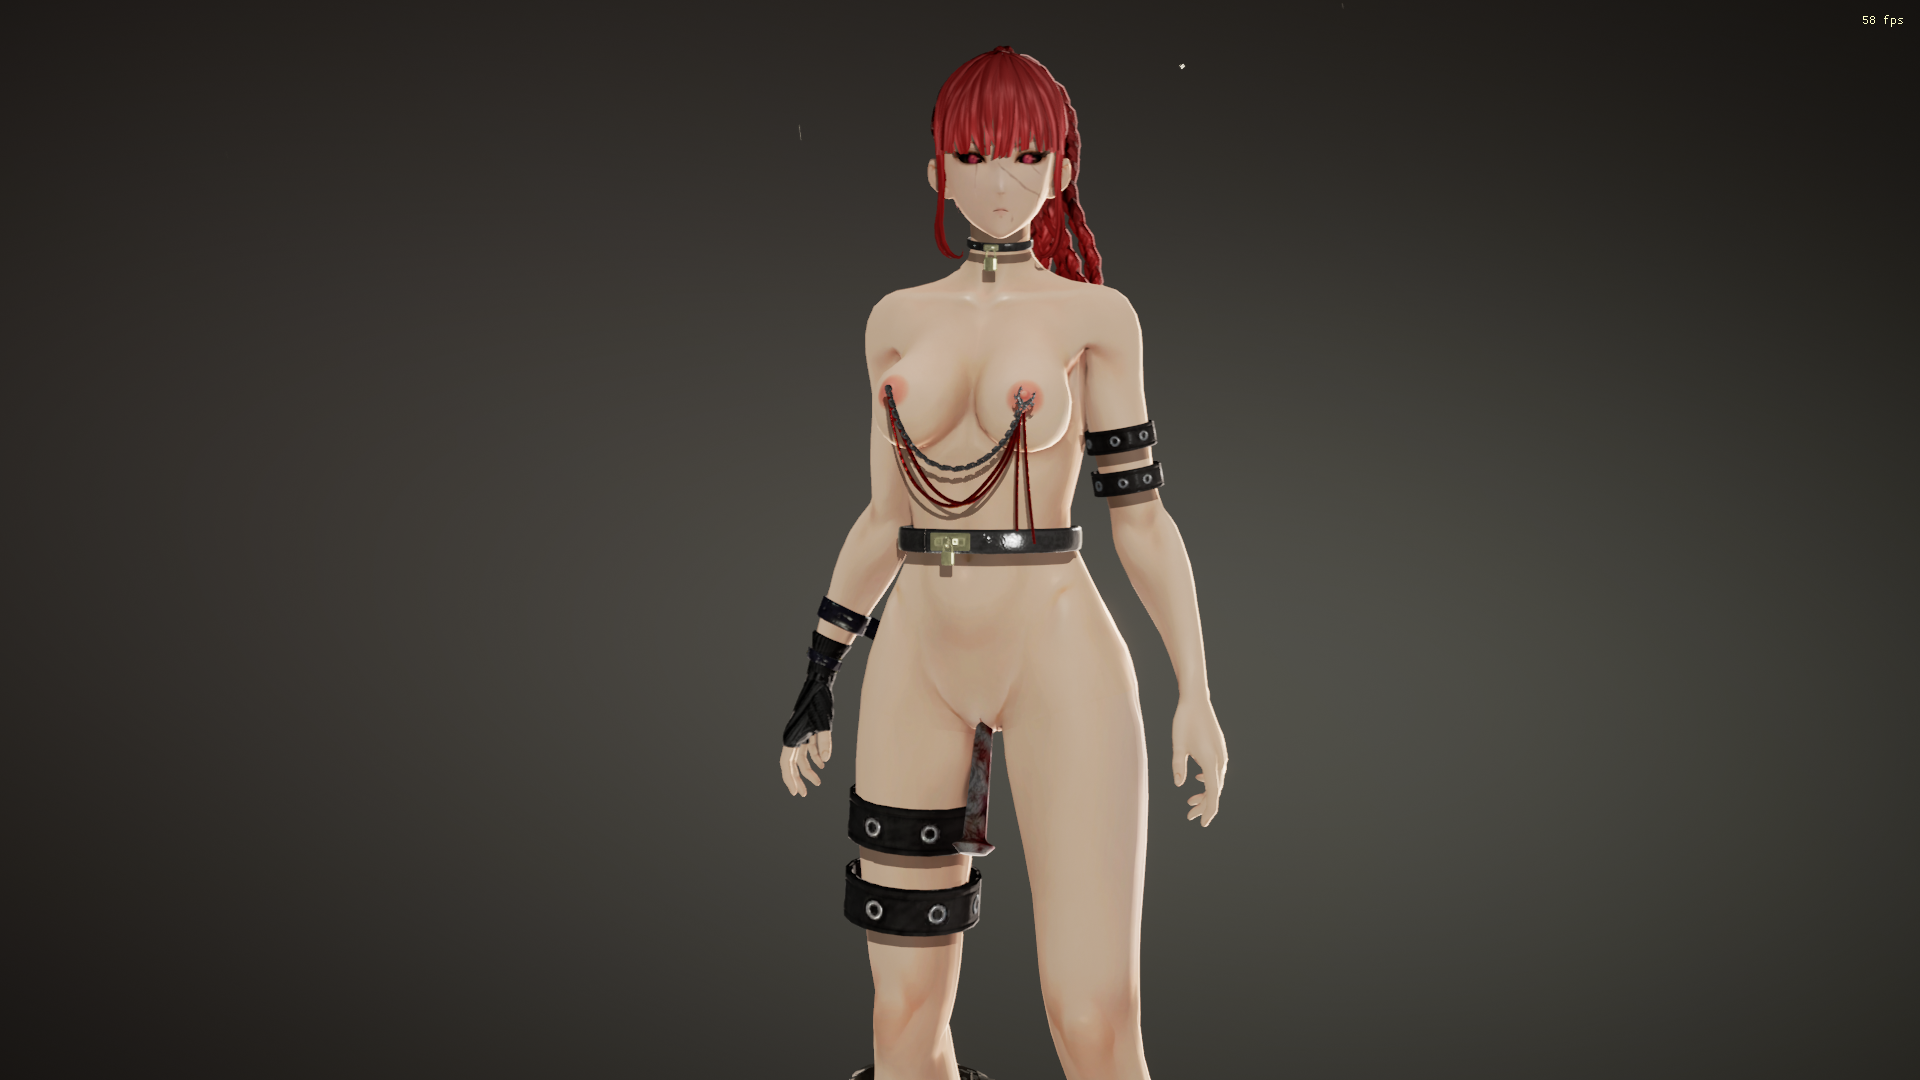 Code Vein Nude Mod Improves the Nipples.